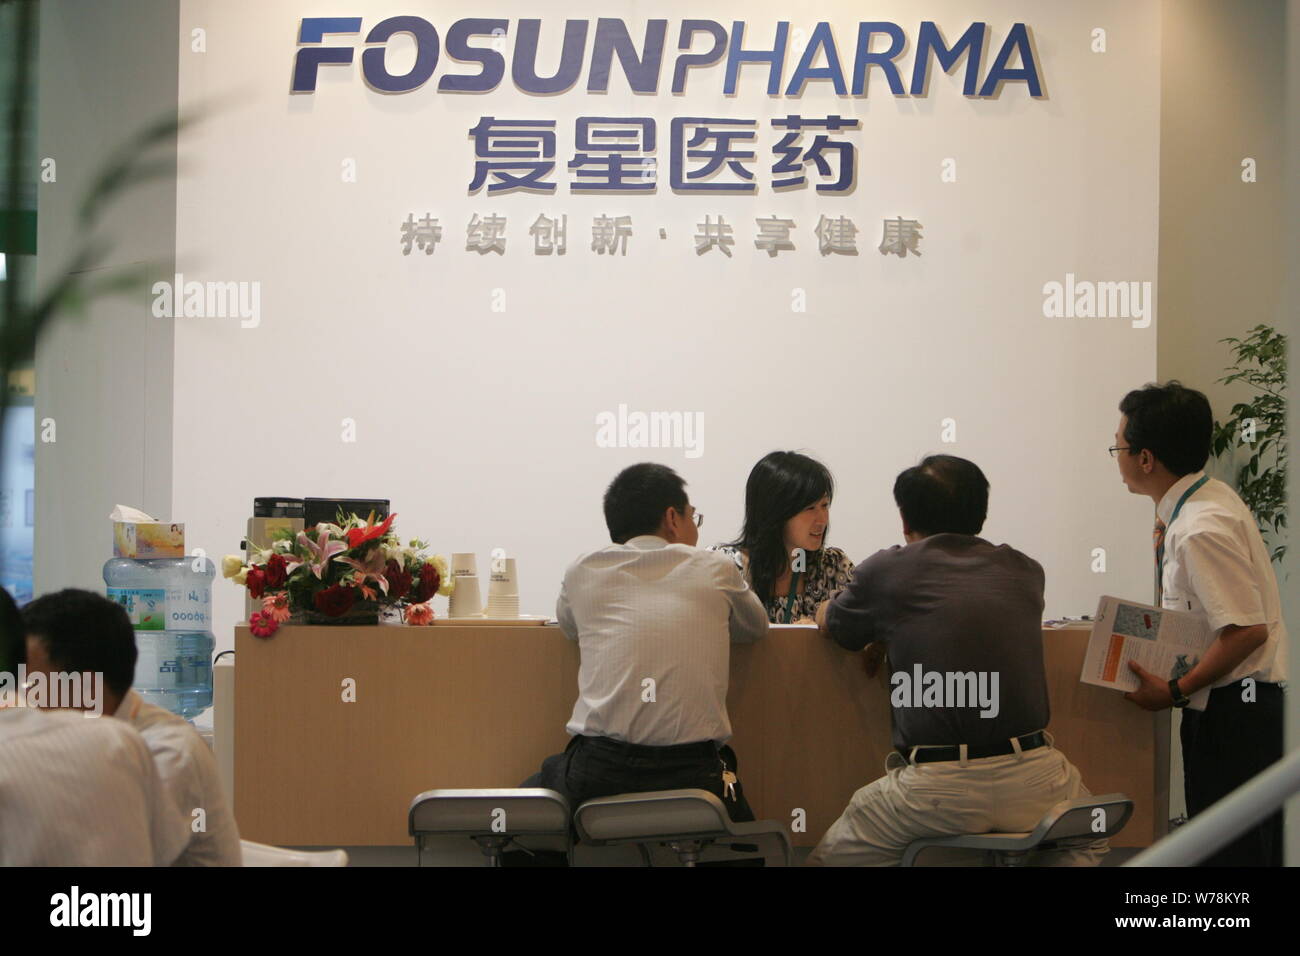 --FILE--People visit the stand of Fosun Pharma of Fosun Group during an exhibition in Shanghai, China, 1 February 2011.   Shanghai Fosun Pharmaceutica Stock Photo